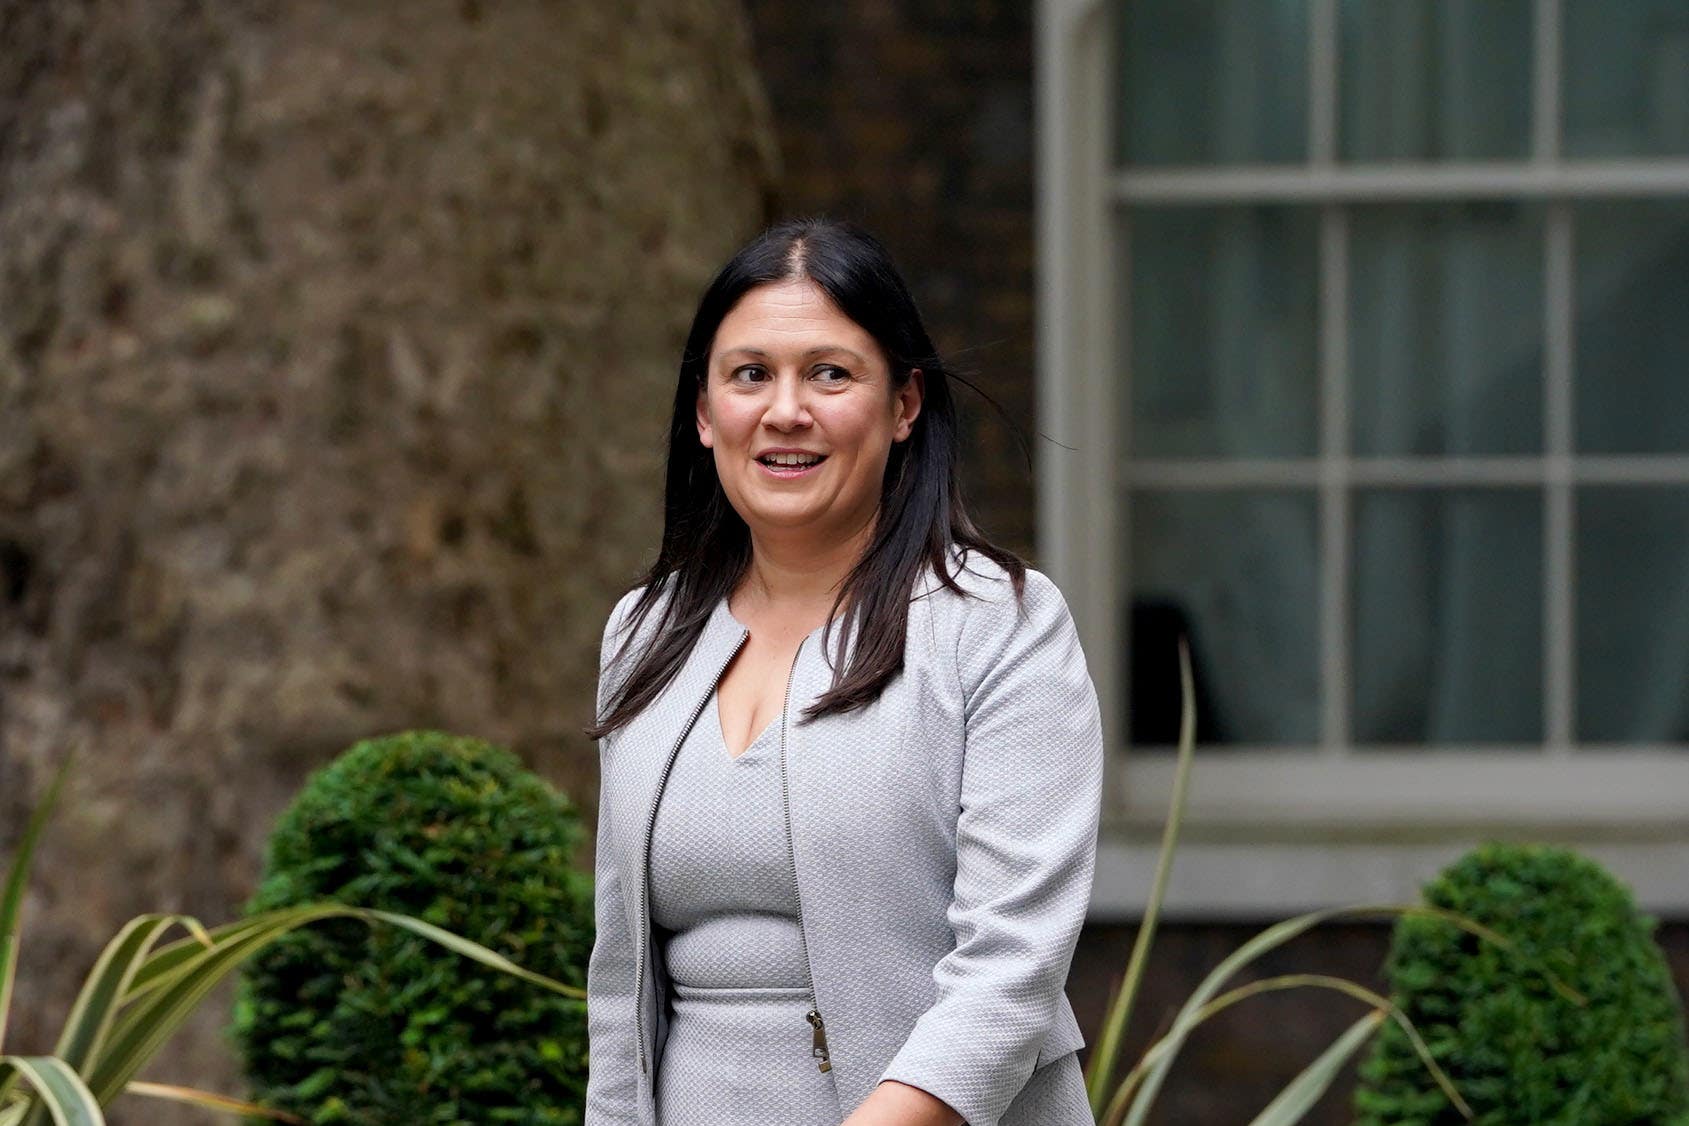 Labour MP Lisa Nandy arrives at 10 Downing Street, London, following the landslide General Election victory for the Labour Party (Lucy North/PA)